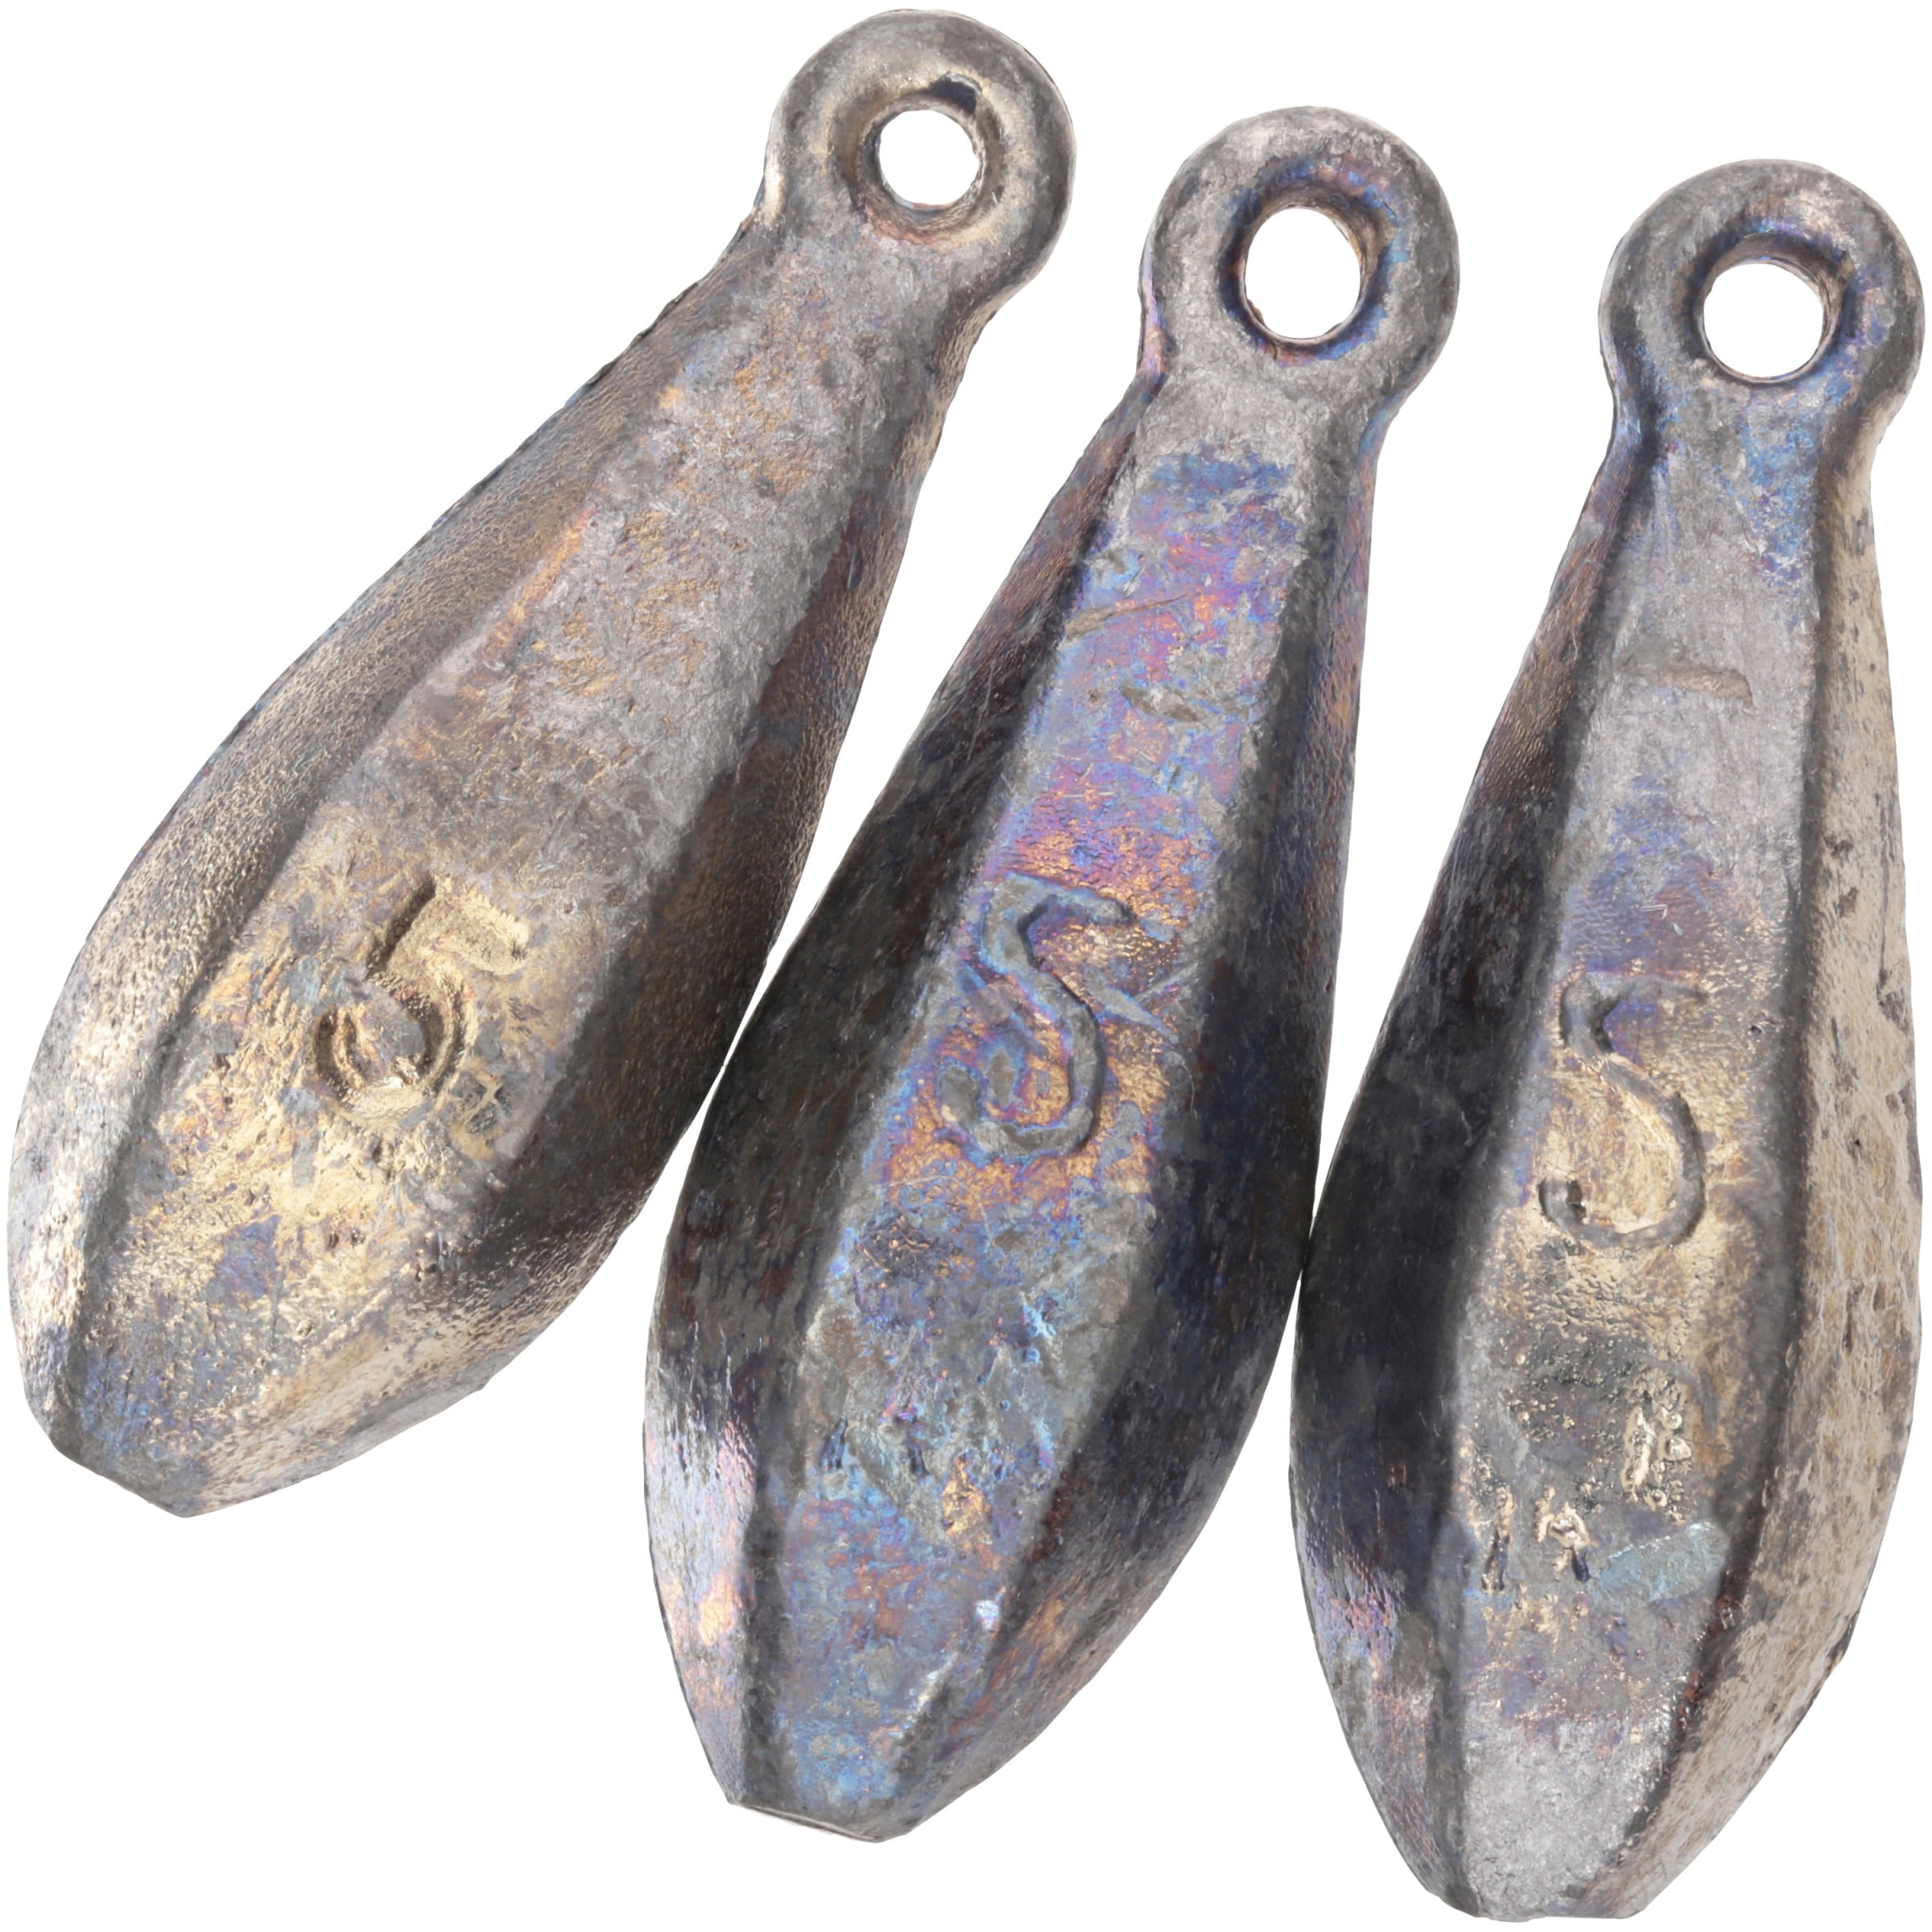 50 ct 3 oz Bank sinkers,fresh water or salt water catfish weights river weights